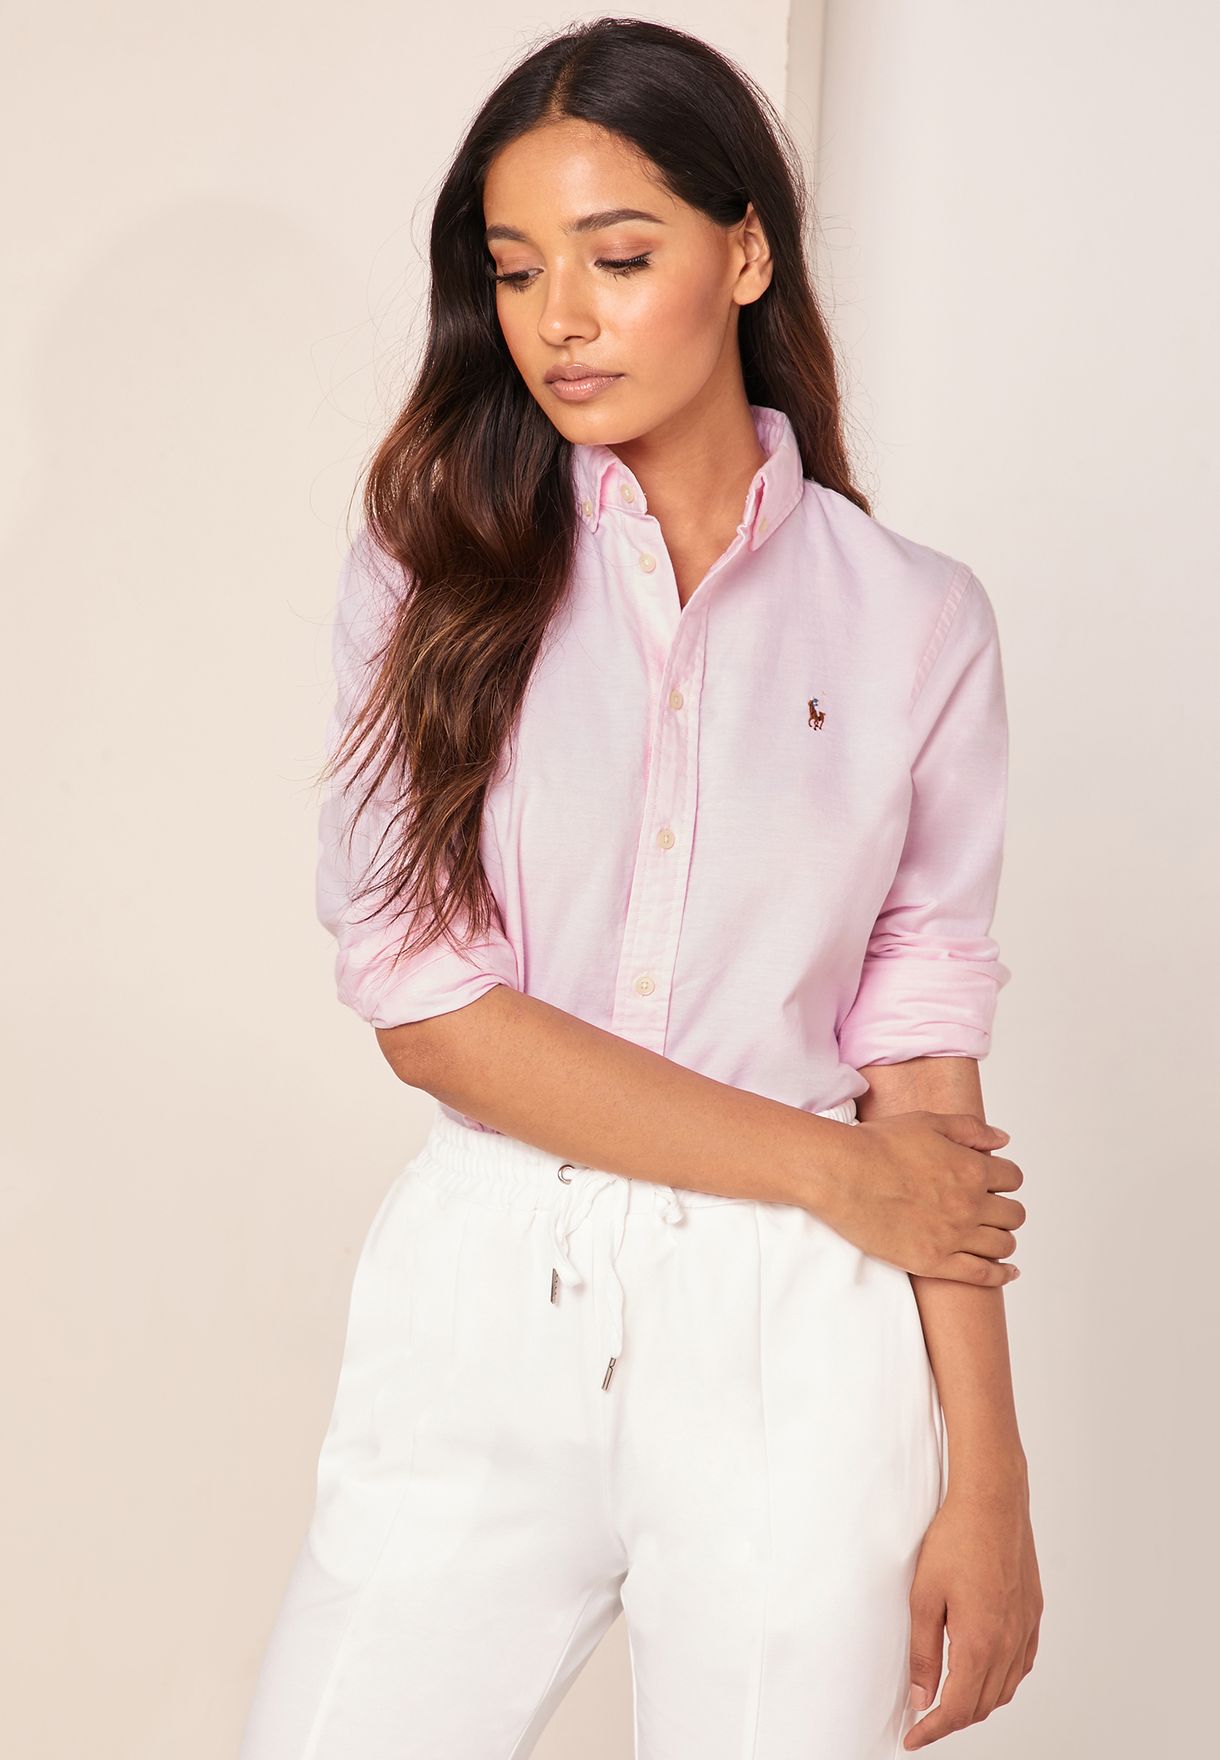 button down polo shirts for womens